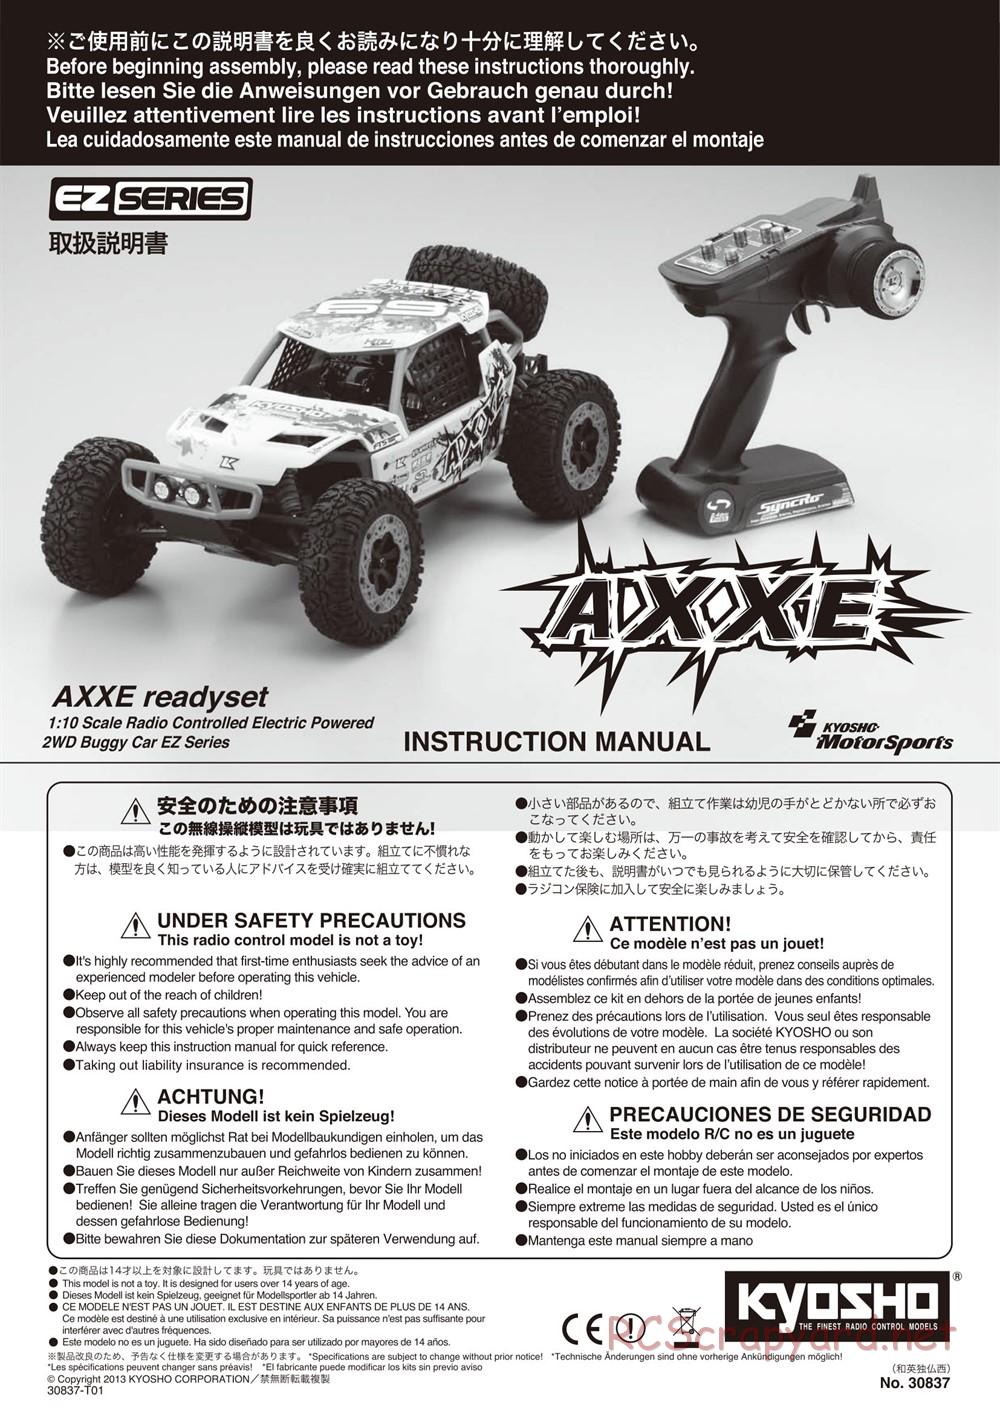 Kyosho - Axxe 2WD Desert Buggy - Manual - Page 1